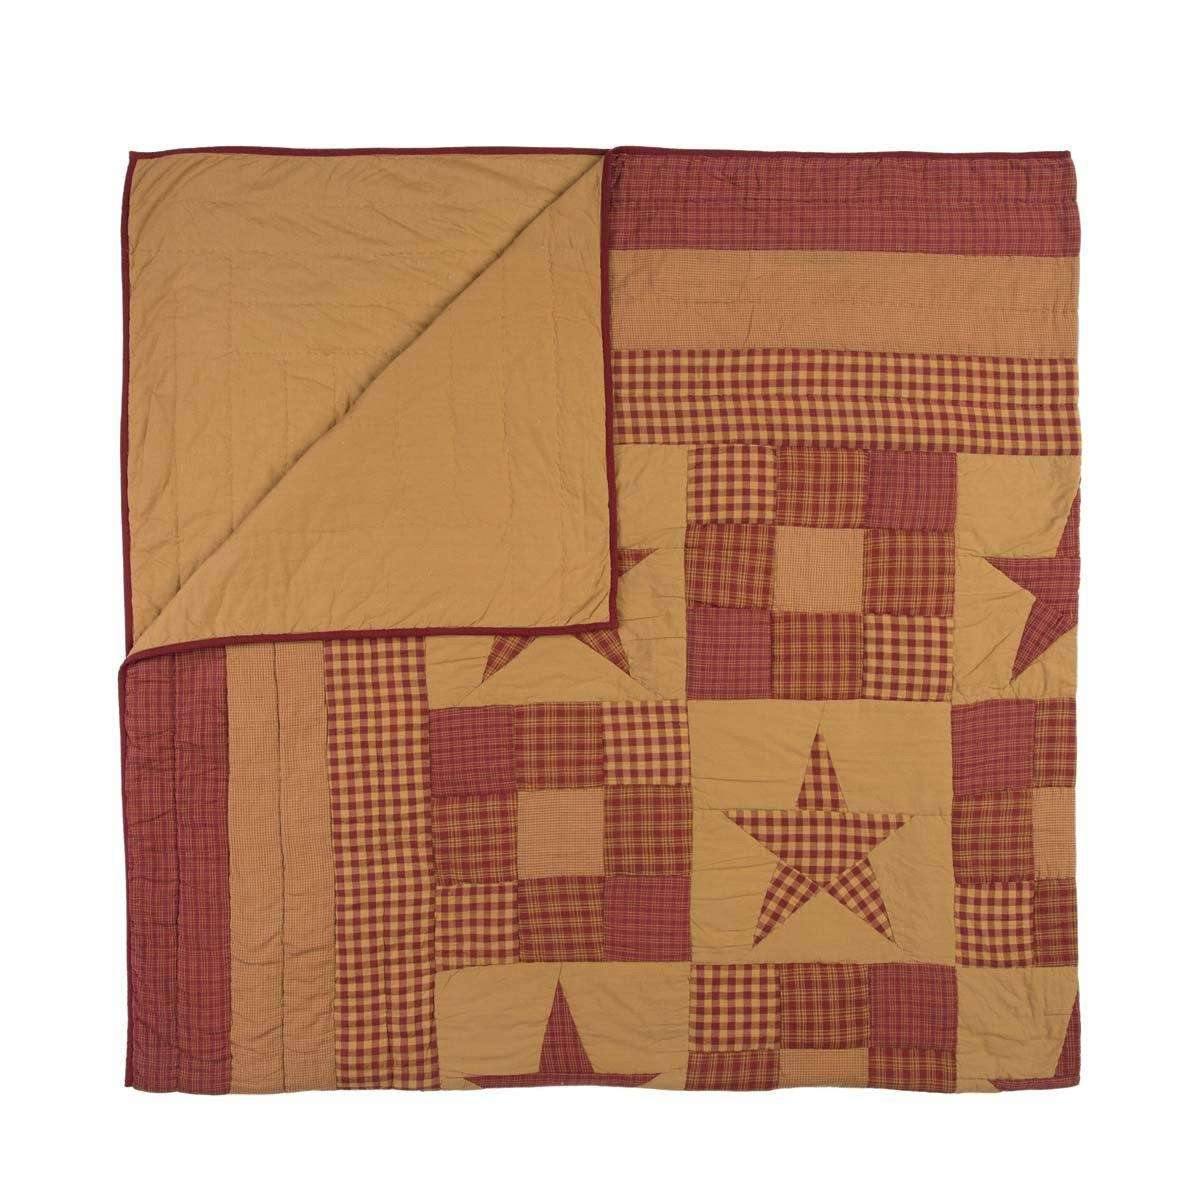 Ninepatch Star Twin Quilt 68Wx86L VHC Brands folded